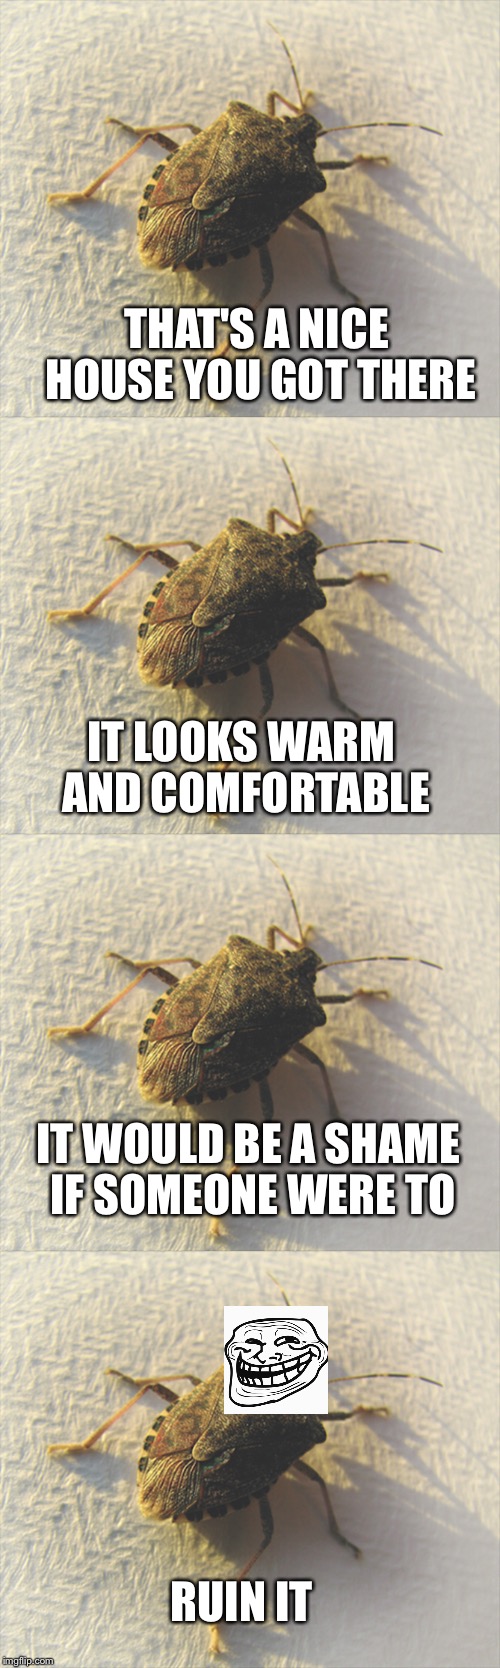 Stinkbugs | THAT'S A NICE HOUSE YOU GOT THERE; IT LOOKS WARM AND COMFORTABLE; IT WOULD BE A SHAME IF SOMEONE WERE TO; RUIN IT | image tagged in stink bug,memes,bugs,funny,funny memes,troll | made w/ Imgflip meme maker